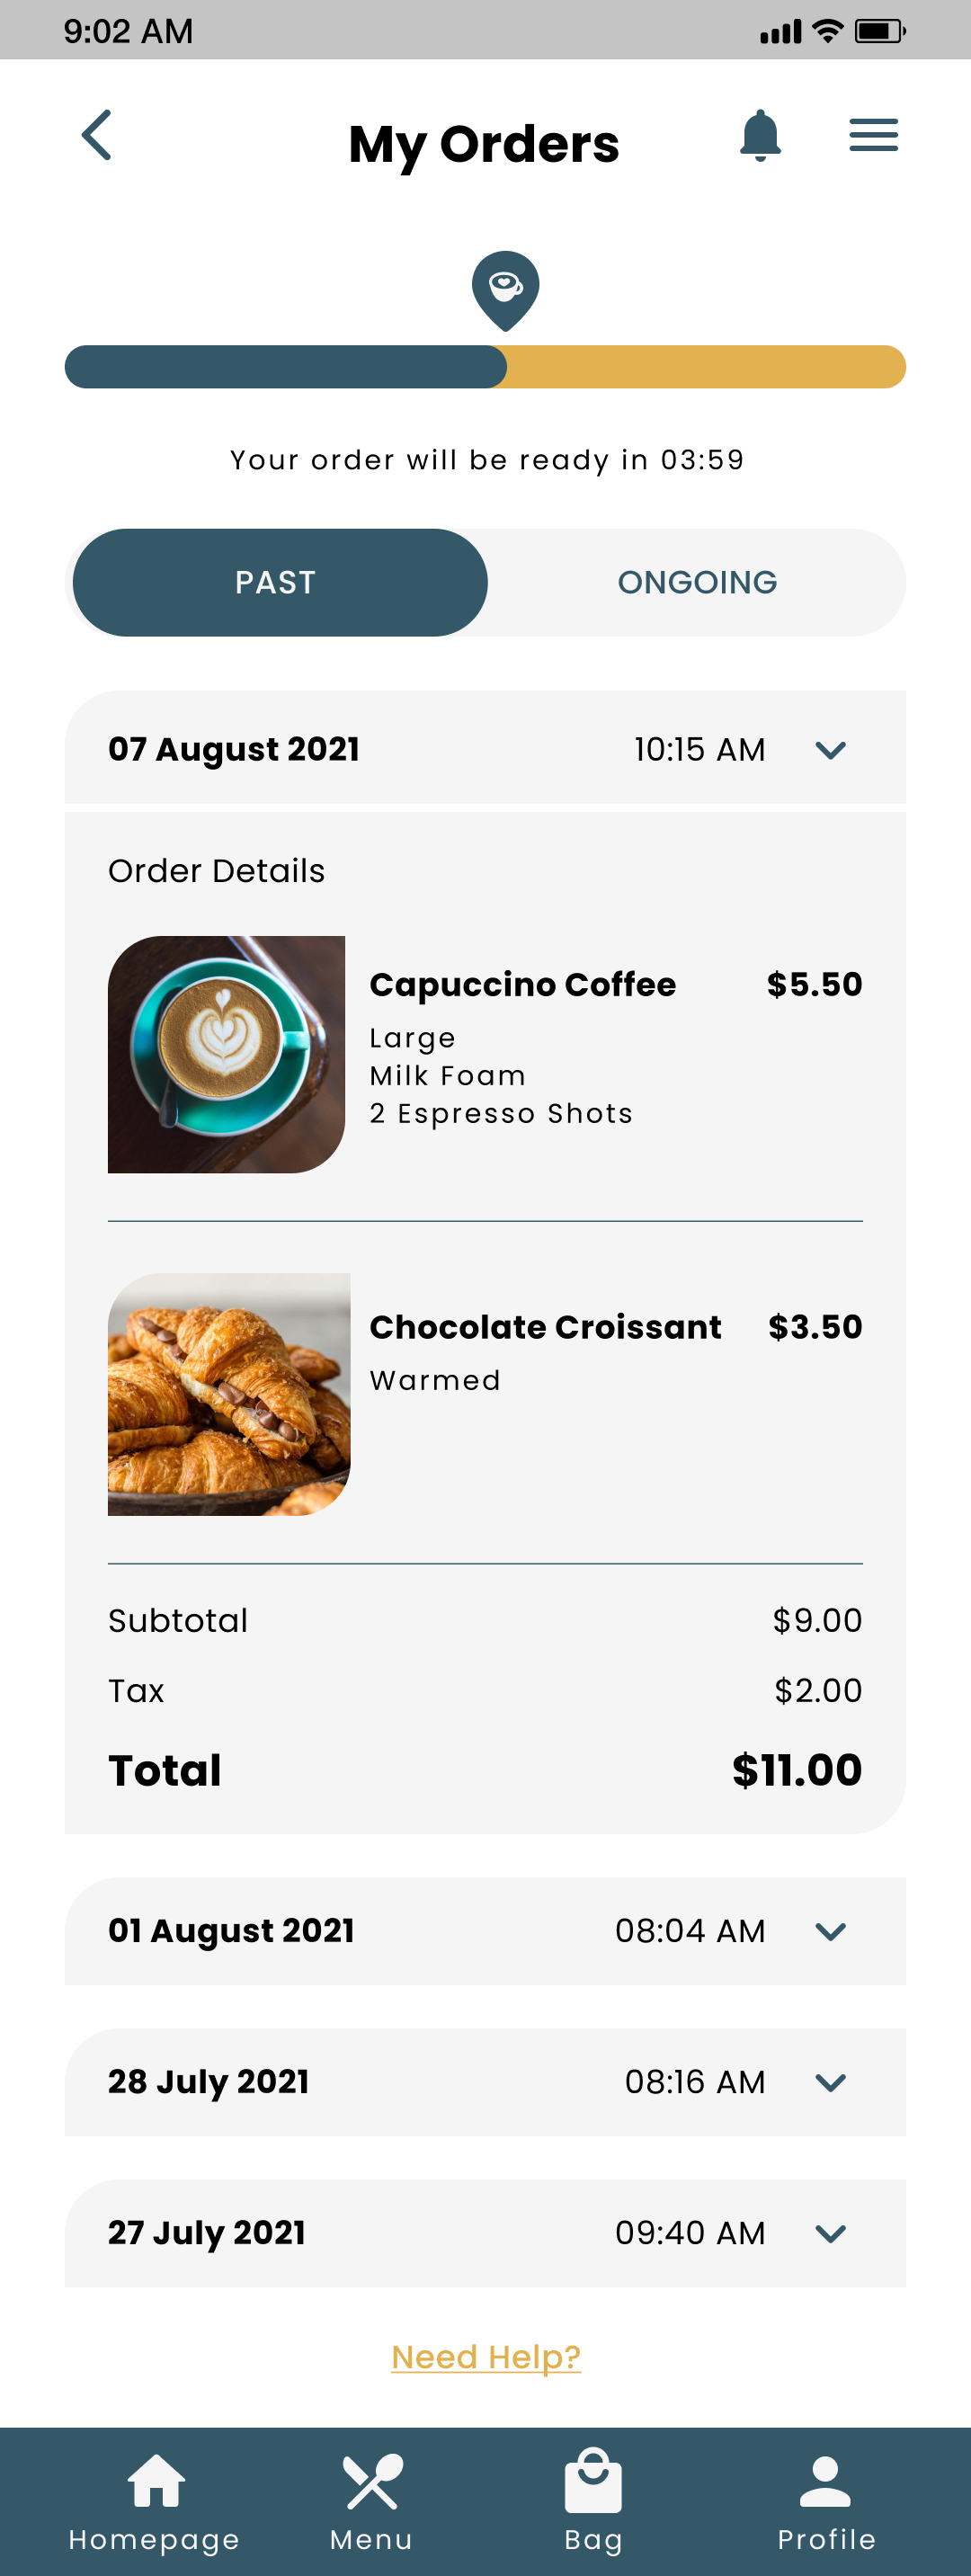 COCO My Orders with "Past" selected screen for mobile app